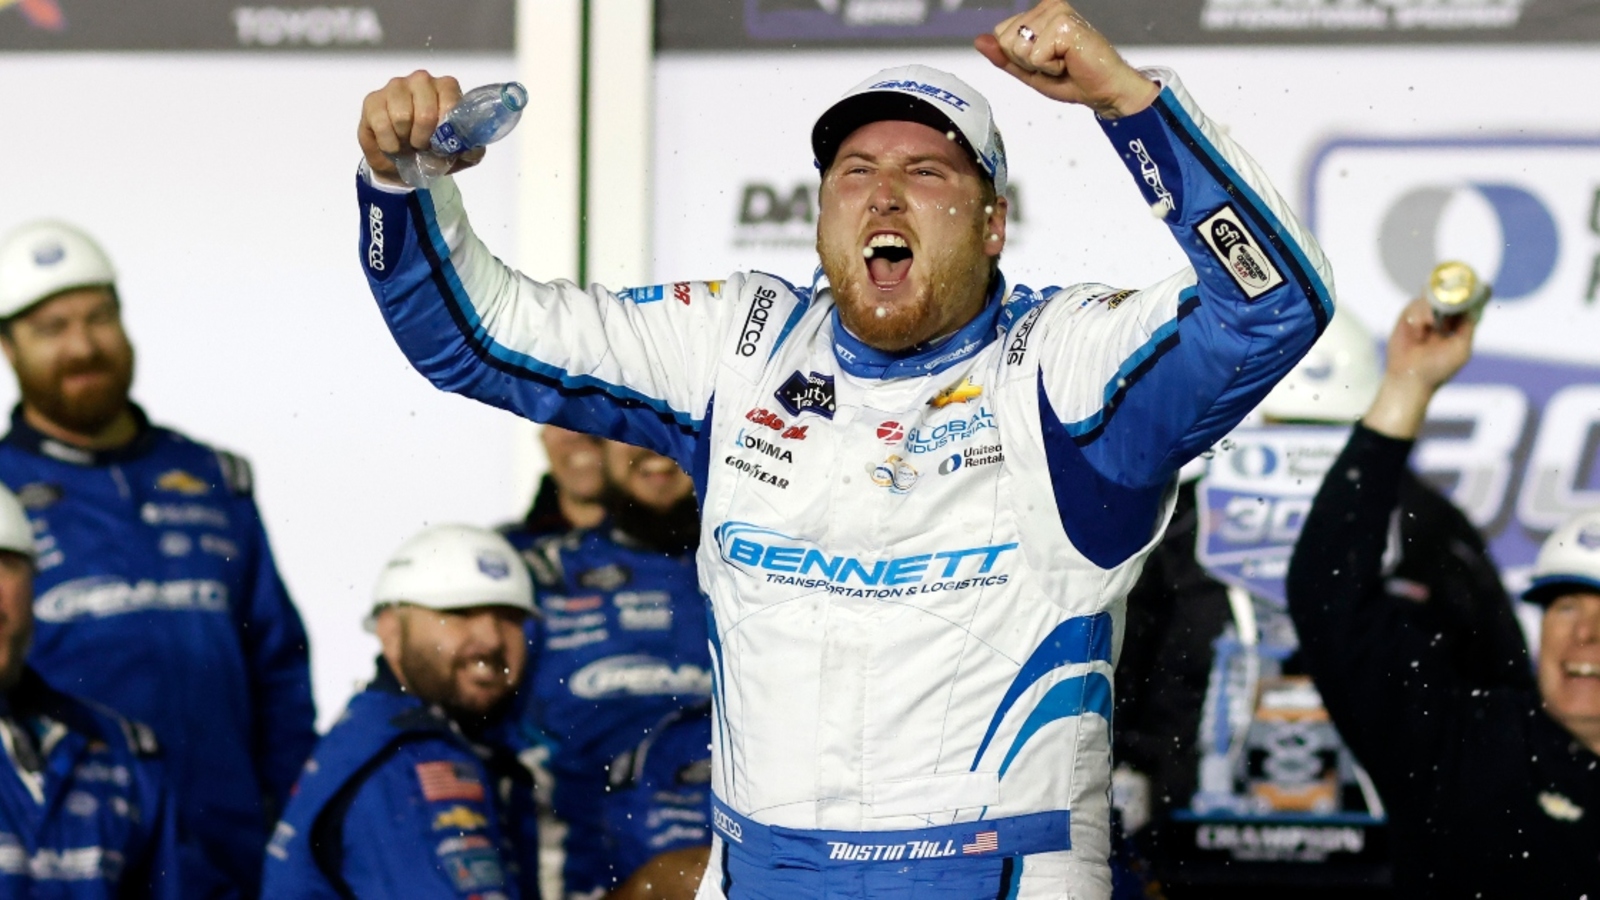 Denny Hamlin doesn’t think Austin Hill’s superspeedway success translates to Cup Series